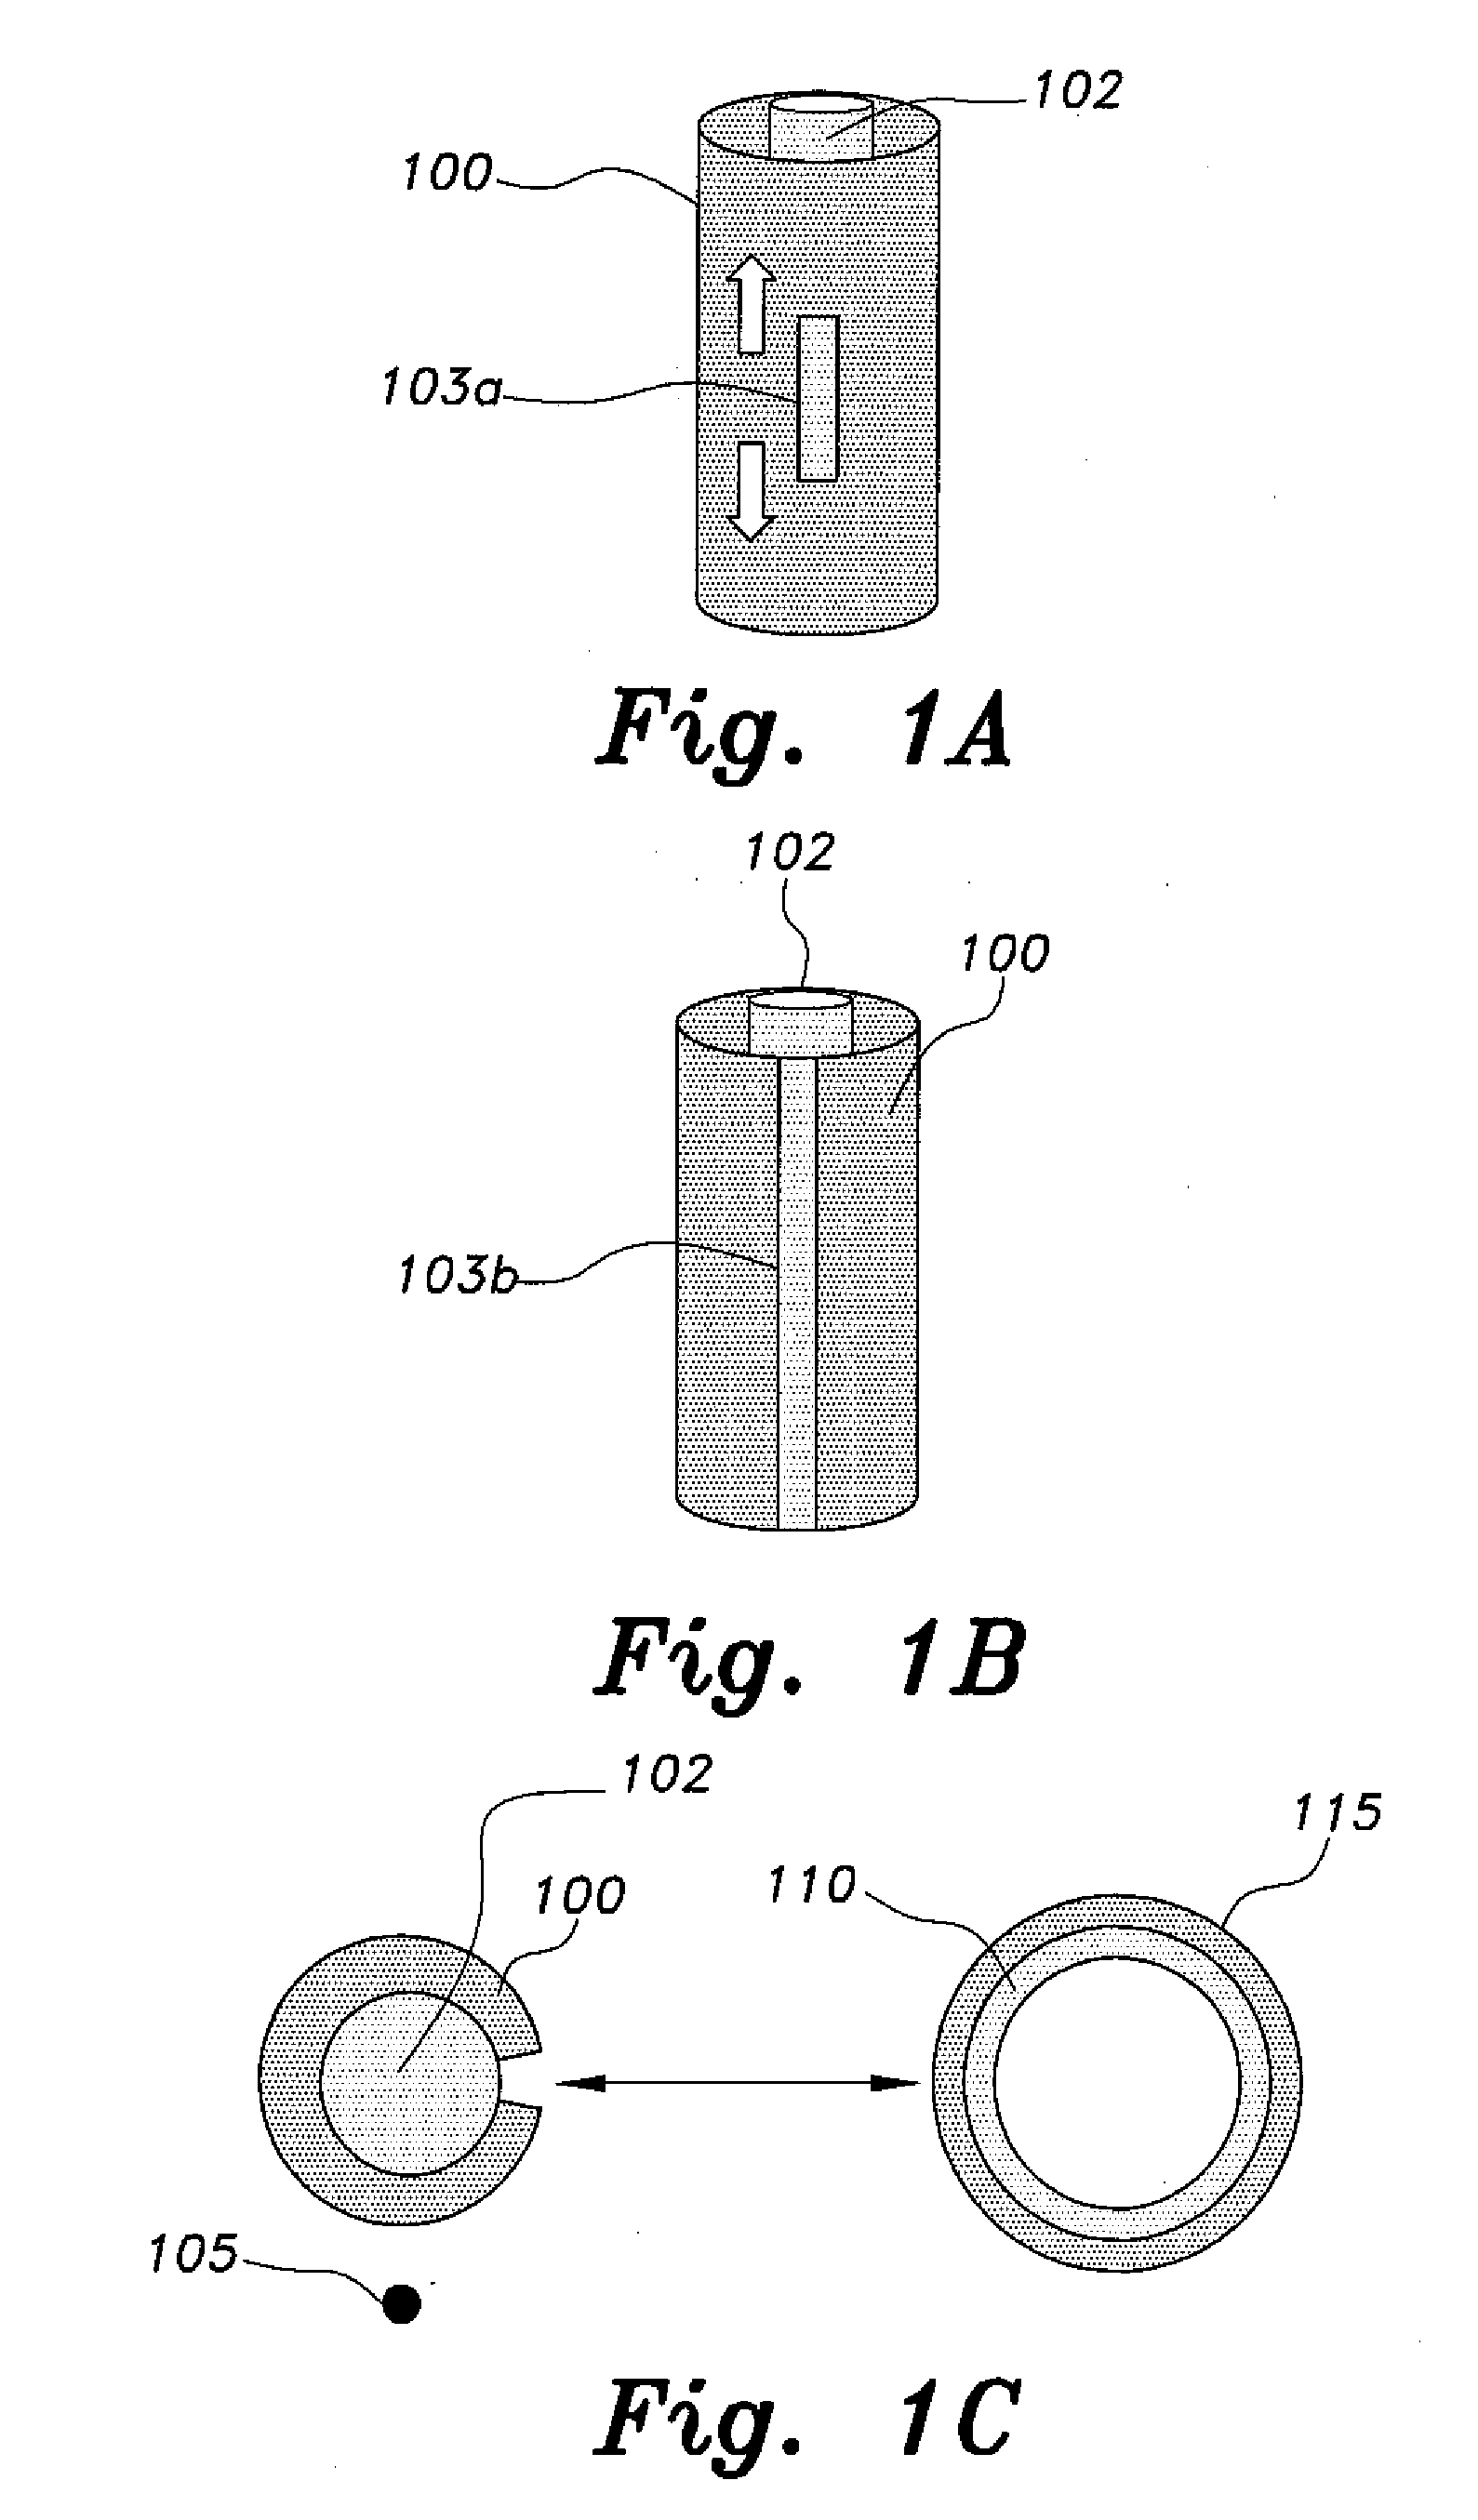 Systems for determining and imaging wax deposition and simultaneous corrosion and wax deposit determination in pipelines